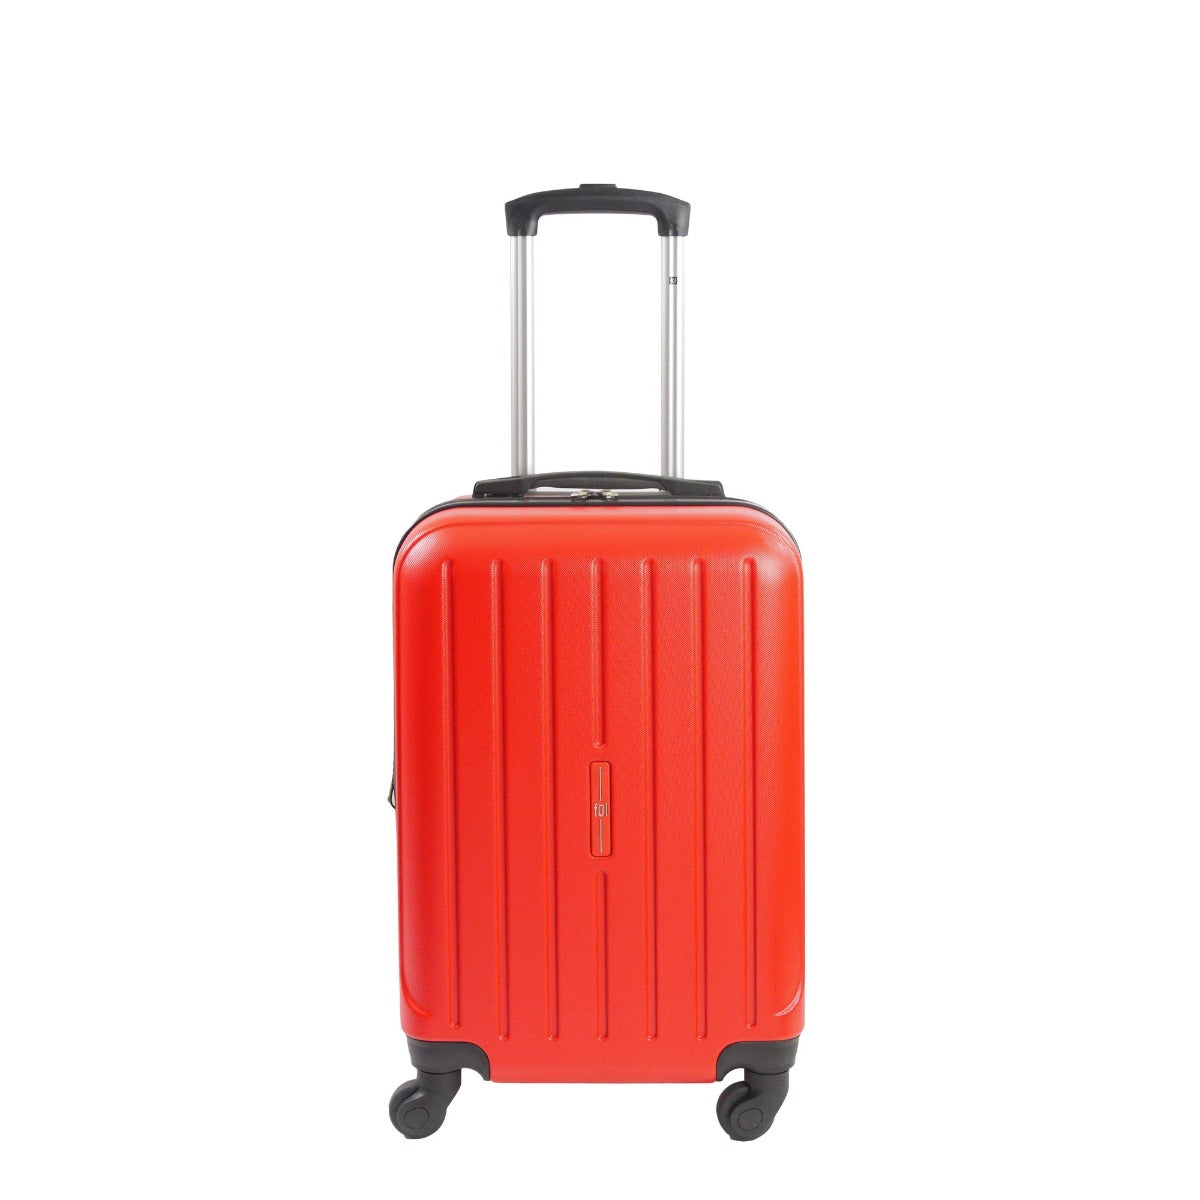 Pure 21-inch scratch resistant carry-on spinner suitcase affordable luggage red